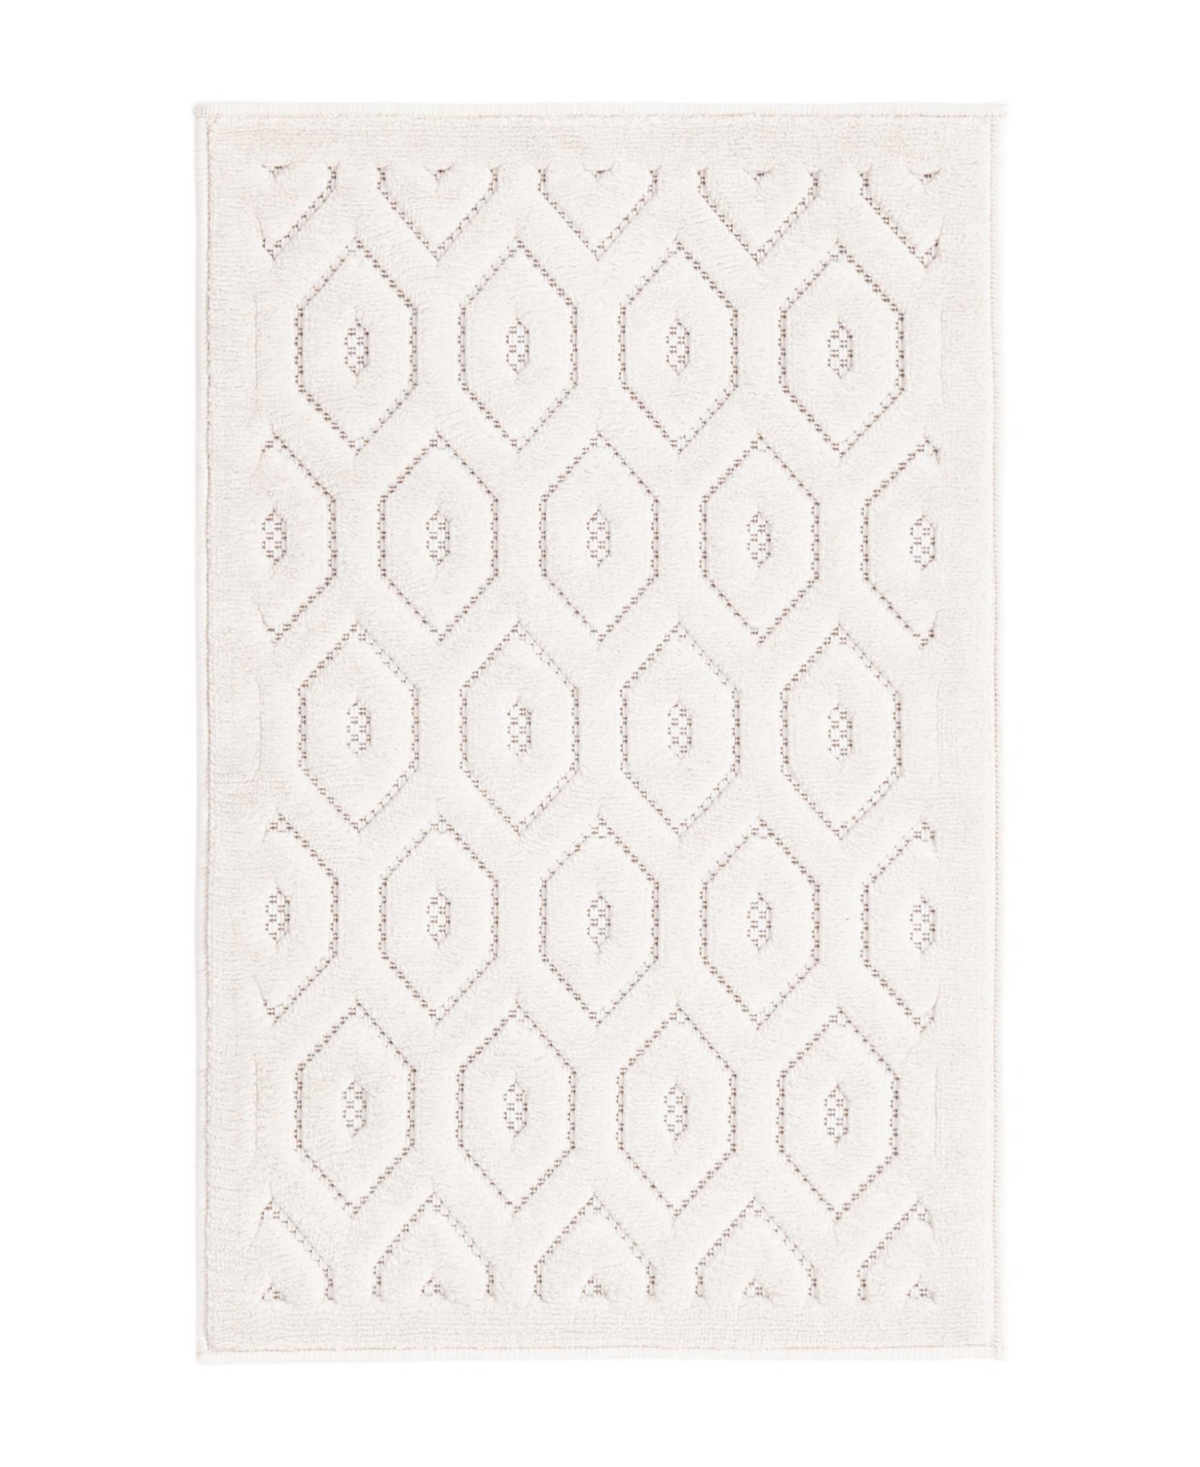 Bayshore Home High-low Pile Latisse Textured Outdoor Lto01 2' X 3' Area Rug In Ivory